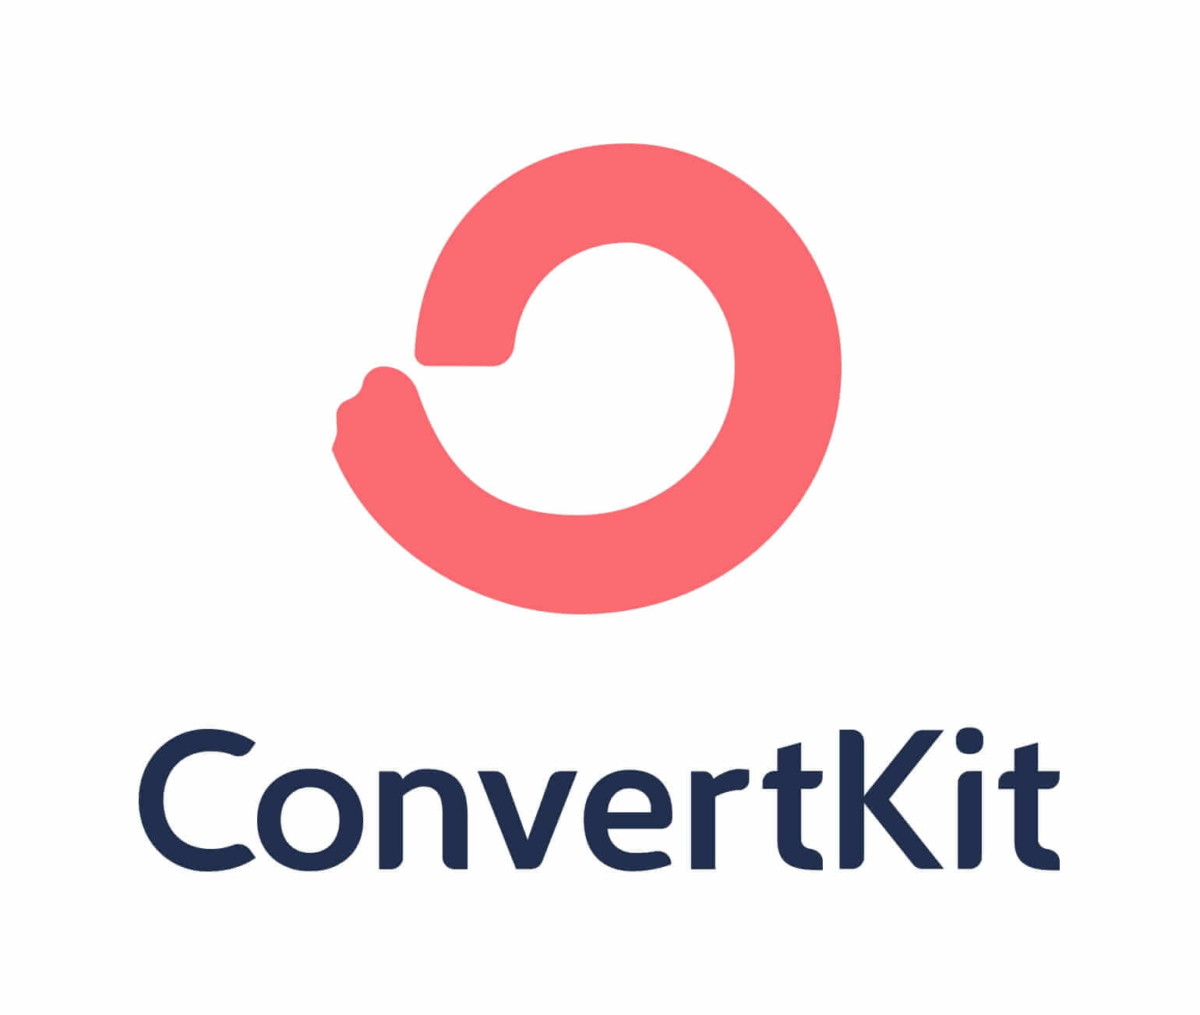 ConvertKit - The Best Email Newsletter Tool